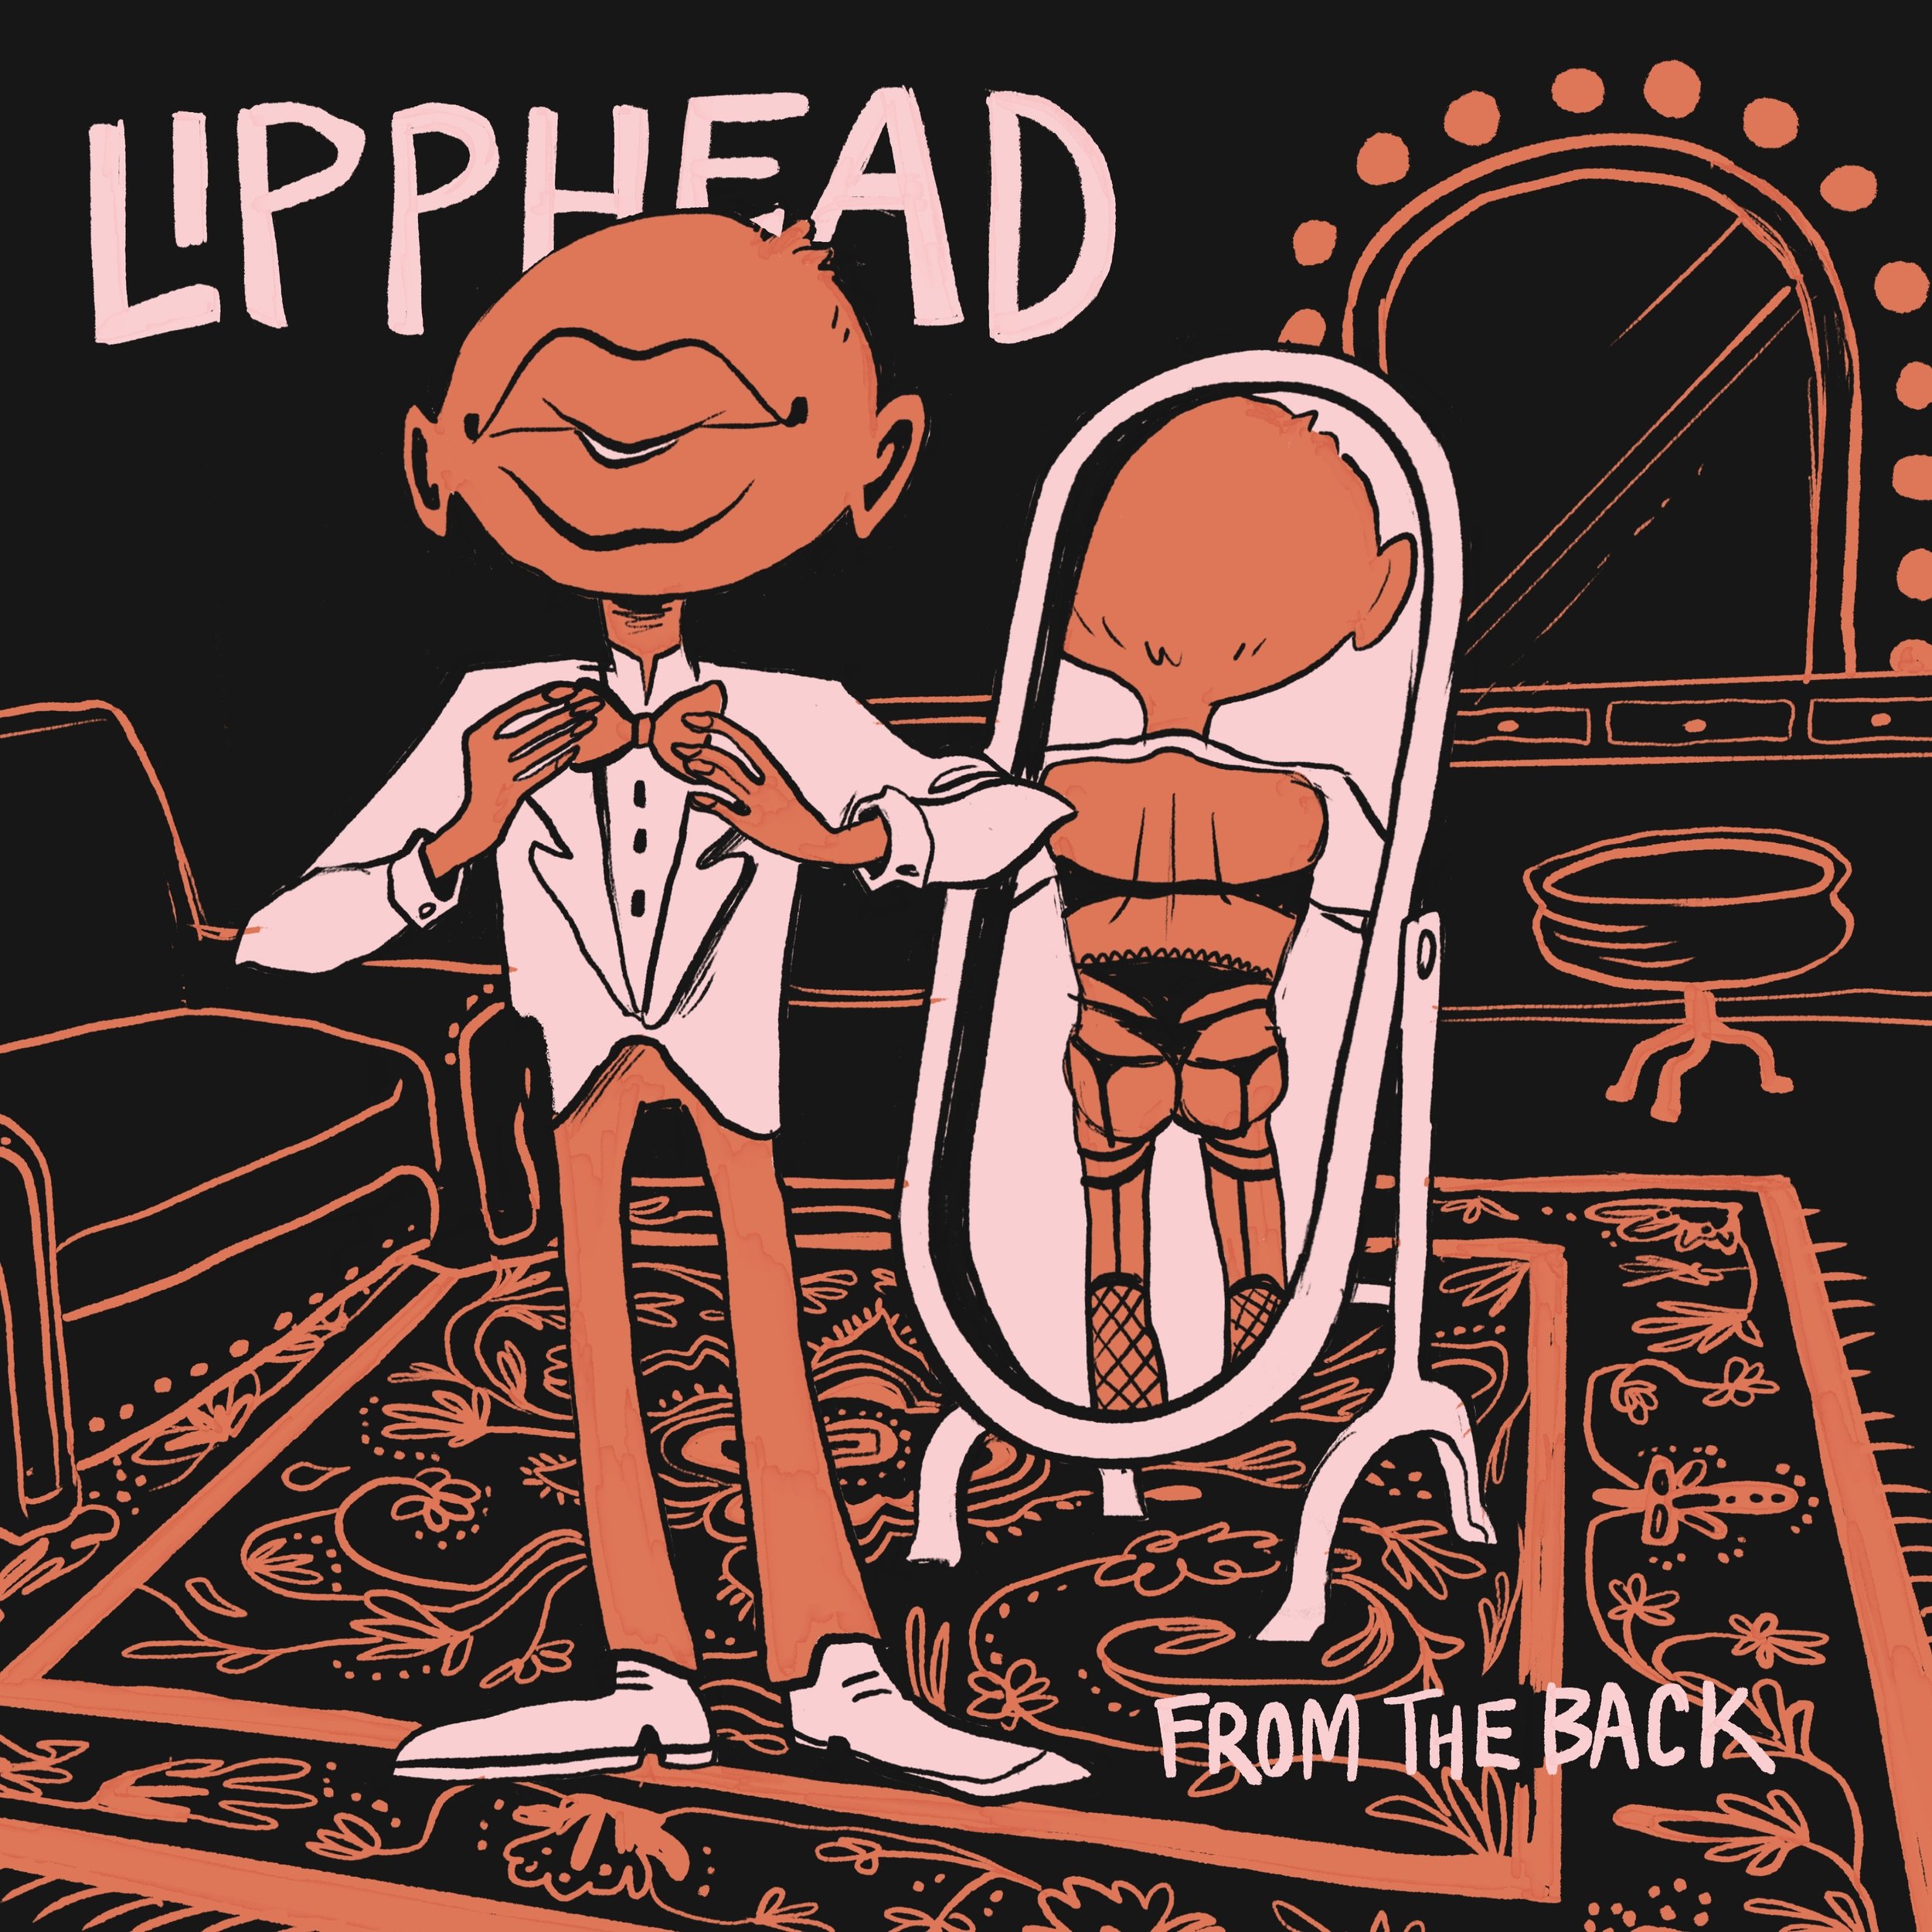 Lipphead - From The Back – $10.00